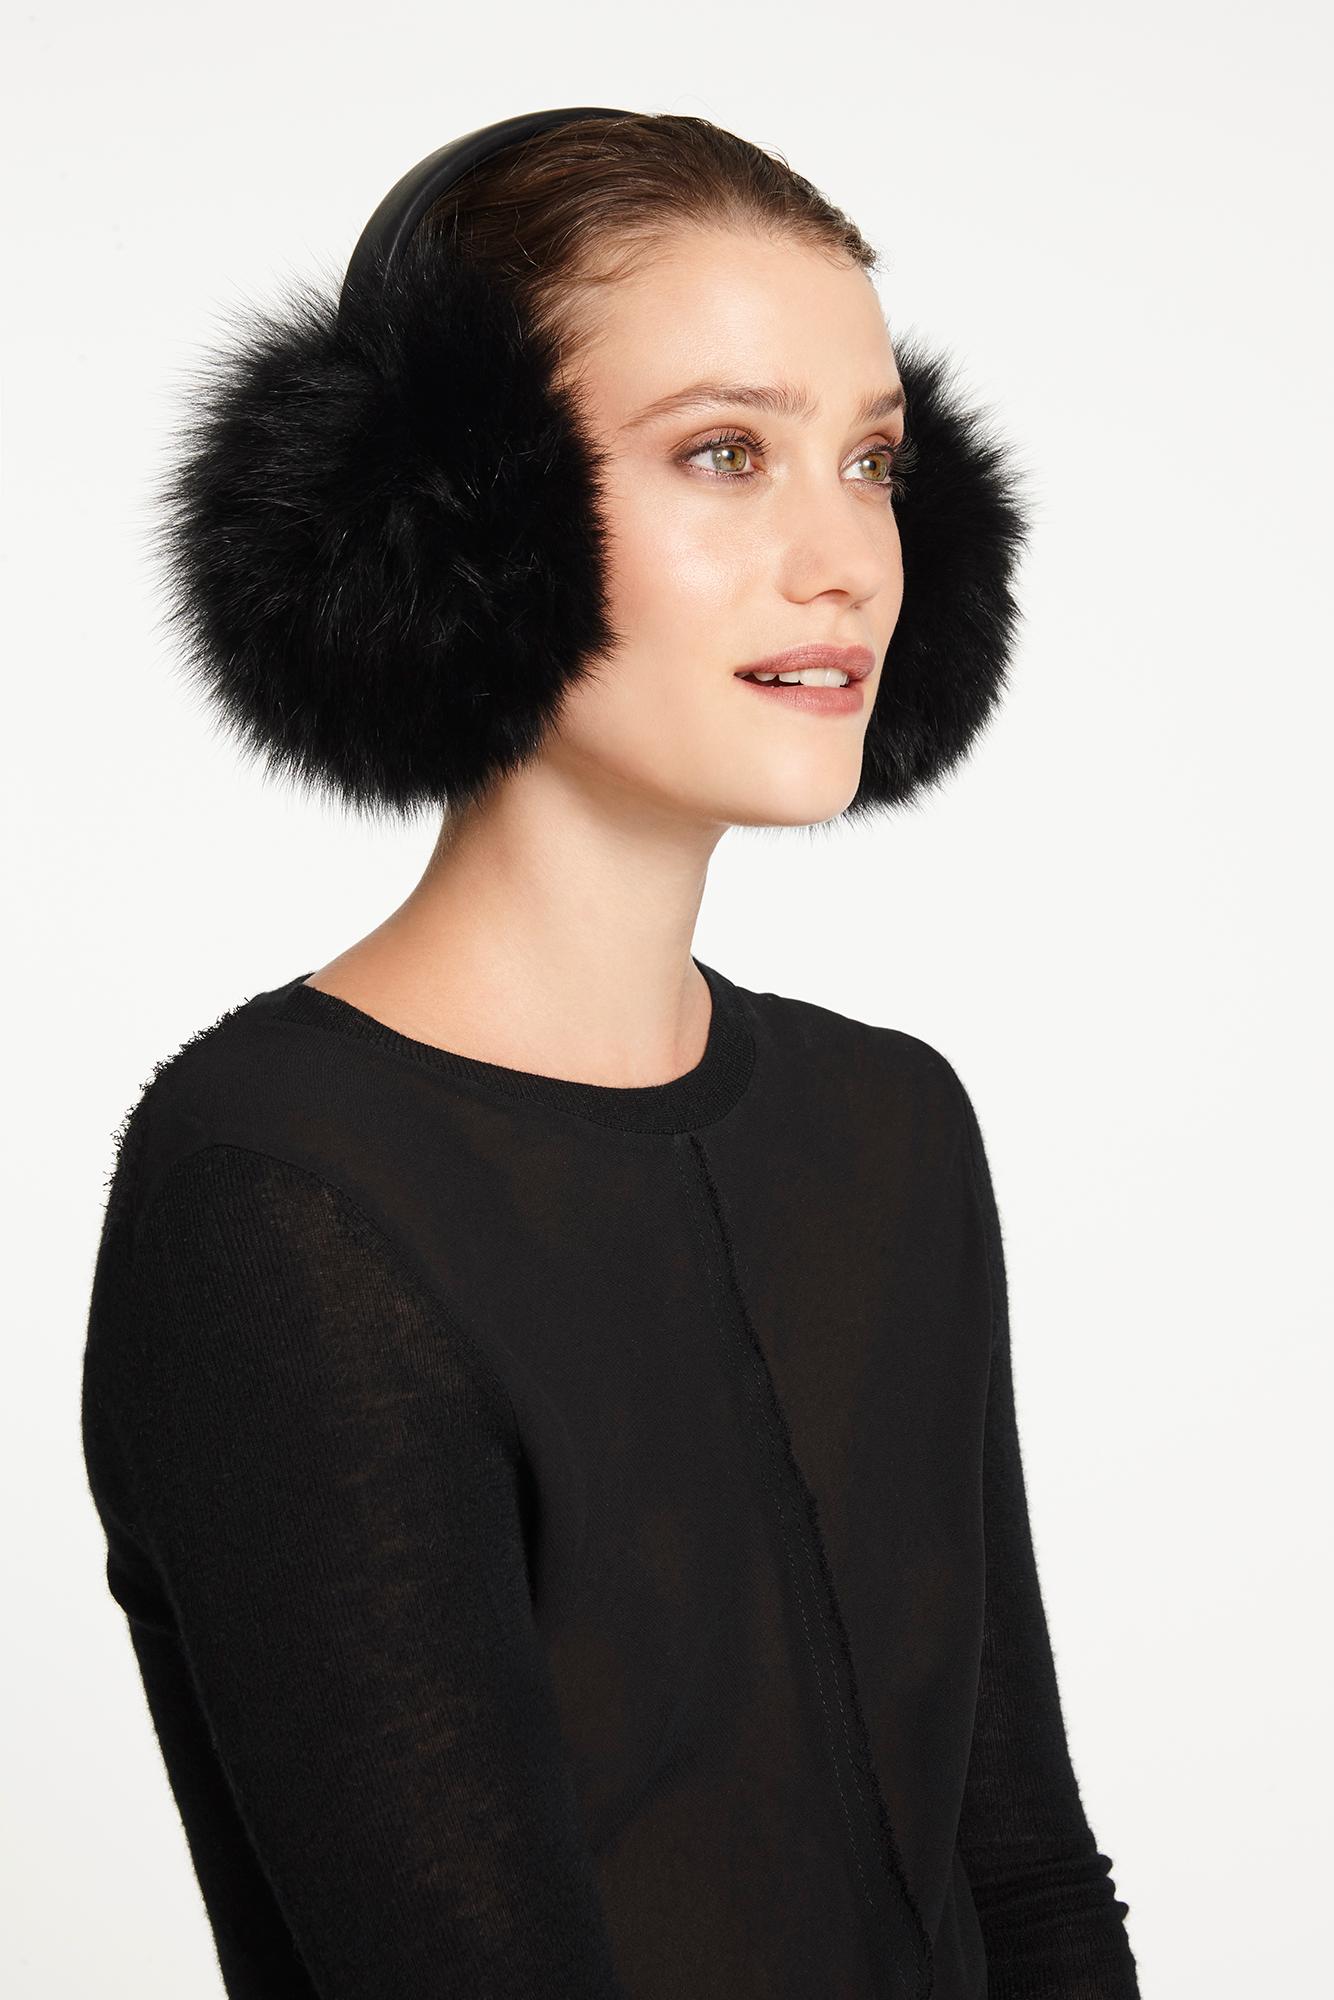 Verheyen London Fox ear muffs are the perfect accessory for winter/autumn dressing. Stay cosy all winter in these luxurious and sumptuous ear muffs wherever you go.


All fur is origin assured and ethically sourced from regulated farms with good